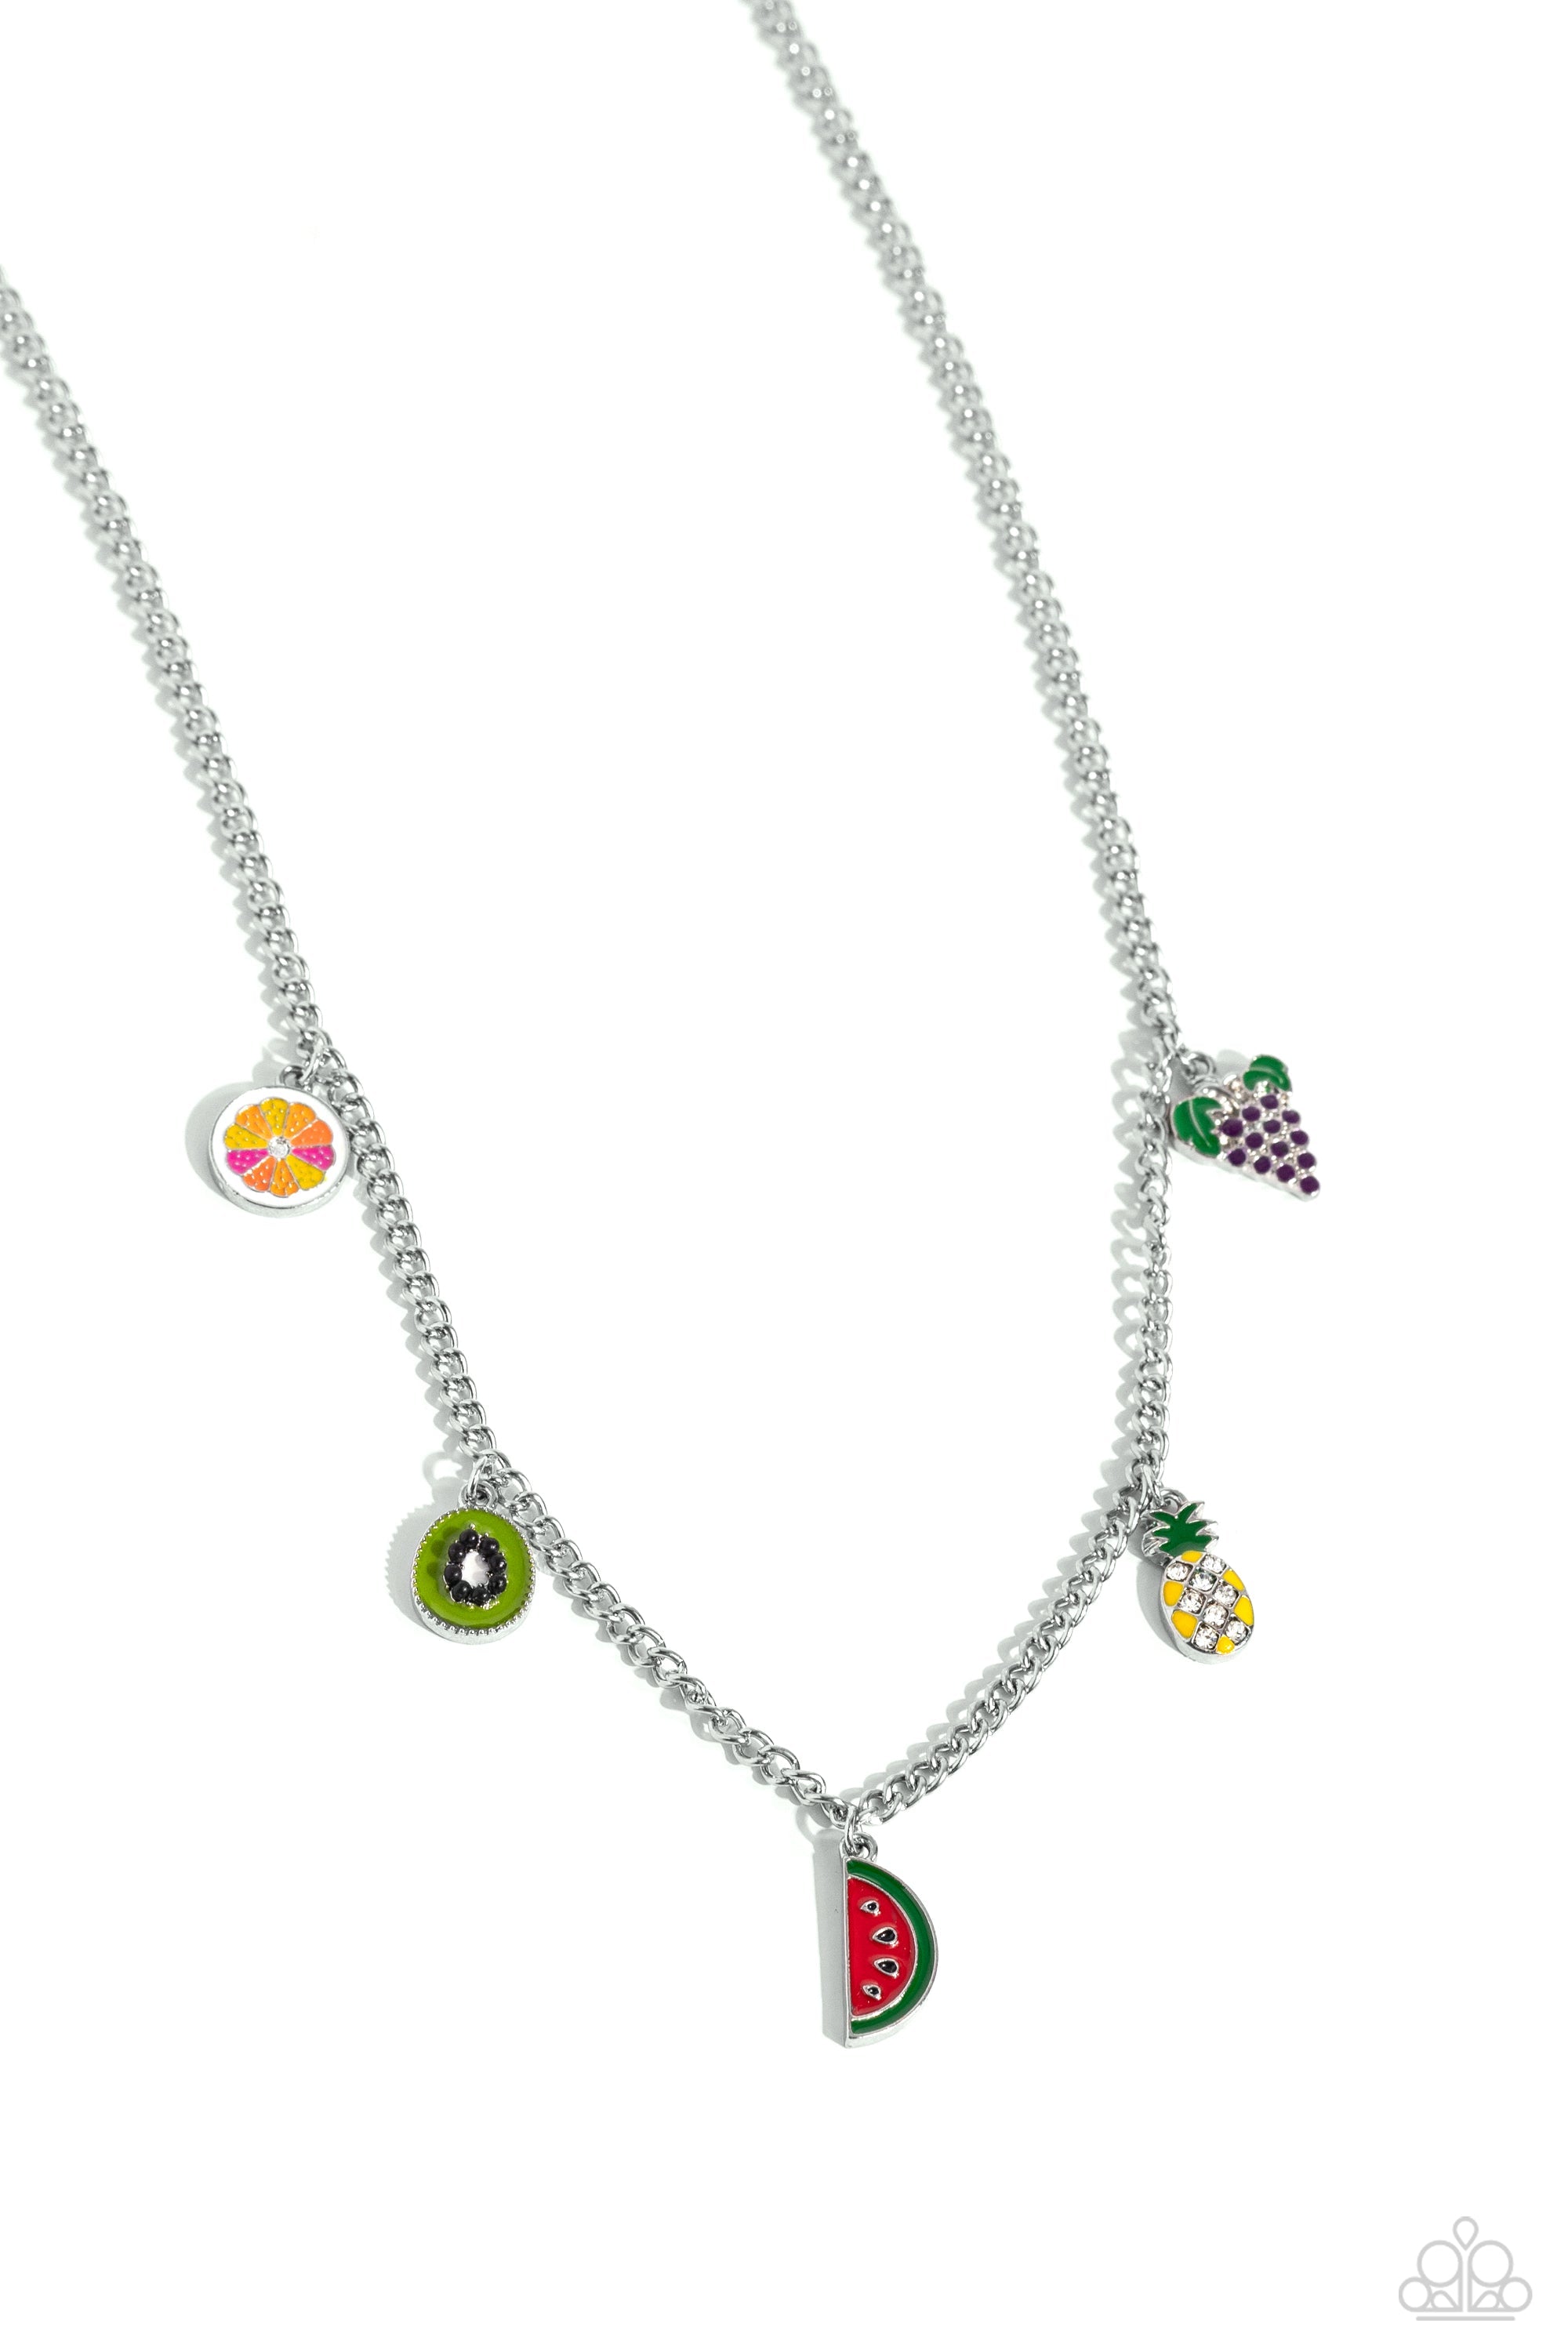 Fruity Flair Multi Charm Necklace - Paparazzi Accessories- lightbox - CarasShop.com - $5 Jewelry by Cara Jewels